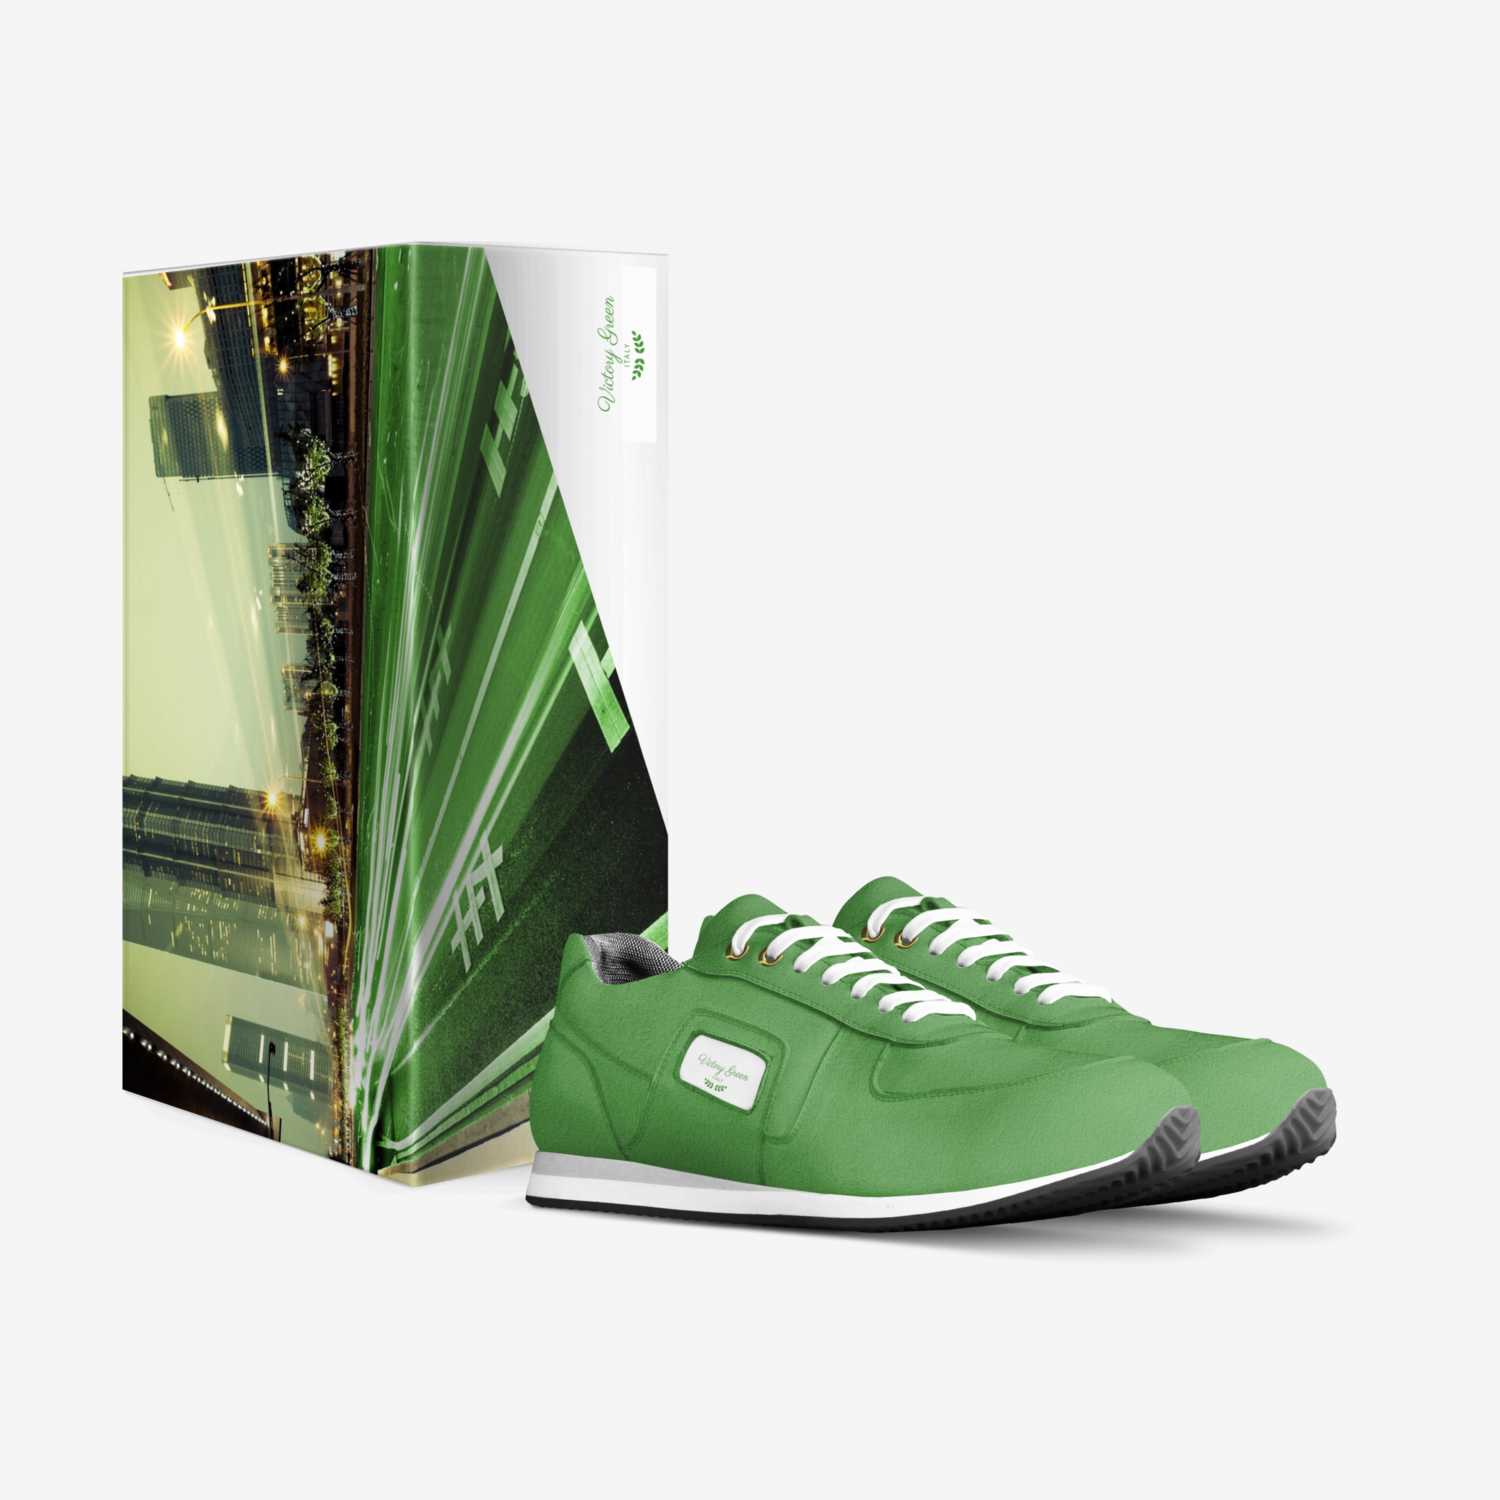 Victory Green custom made in Italy shoes by Bls Footwear | Box view